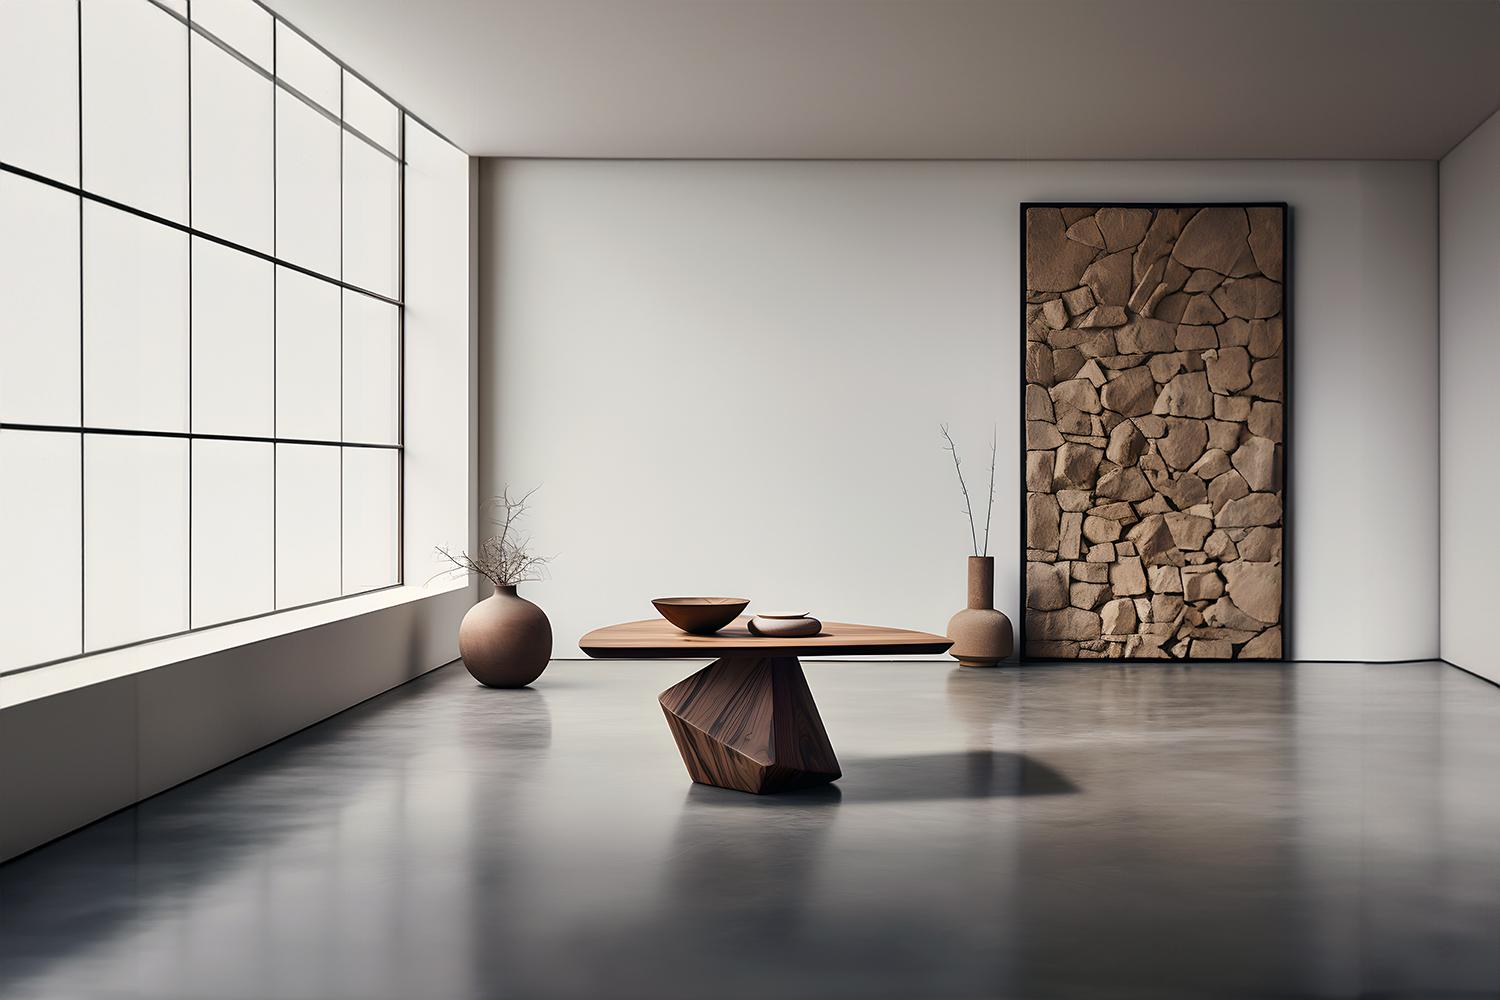 Sculptural Coffee Table Made of Solid Wood, Center Table Solace S30 by Joel Escalona


The Solace table series, designed by Joel Escalona, is a furniture collection that exudes balance and presence, thanks to its sensuous, dense, and irregular